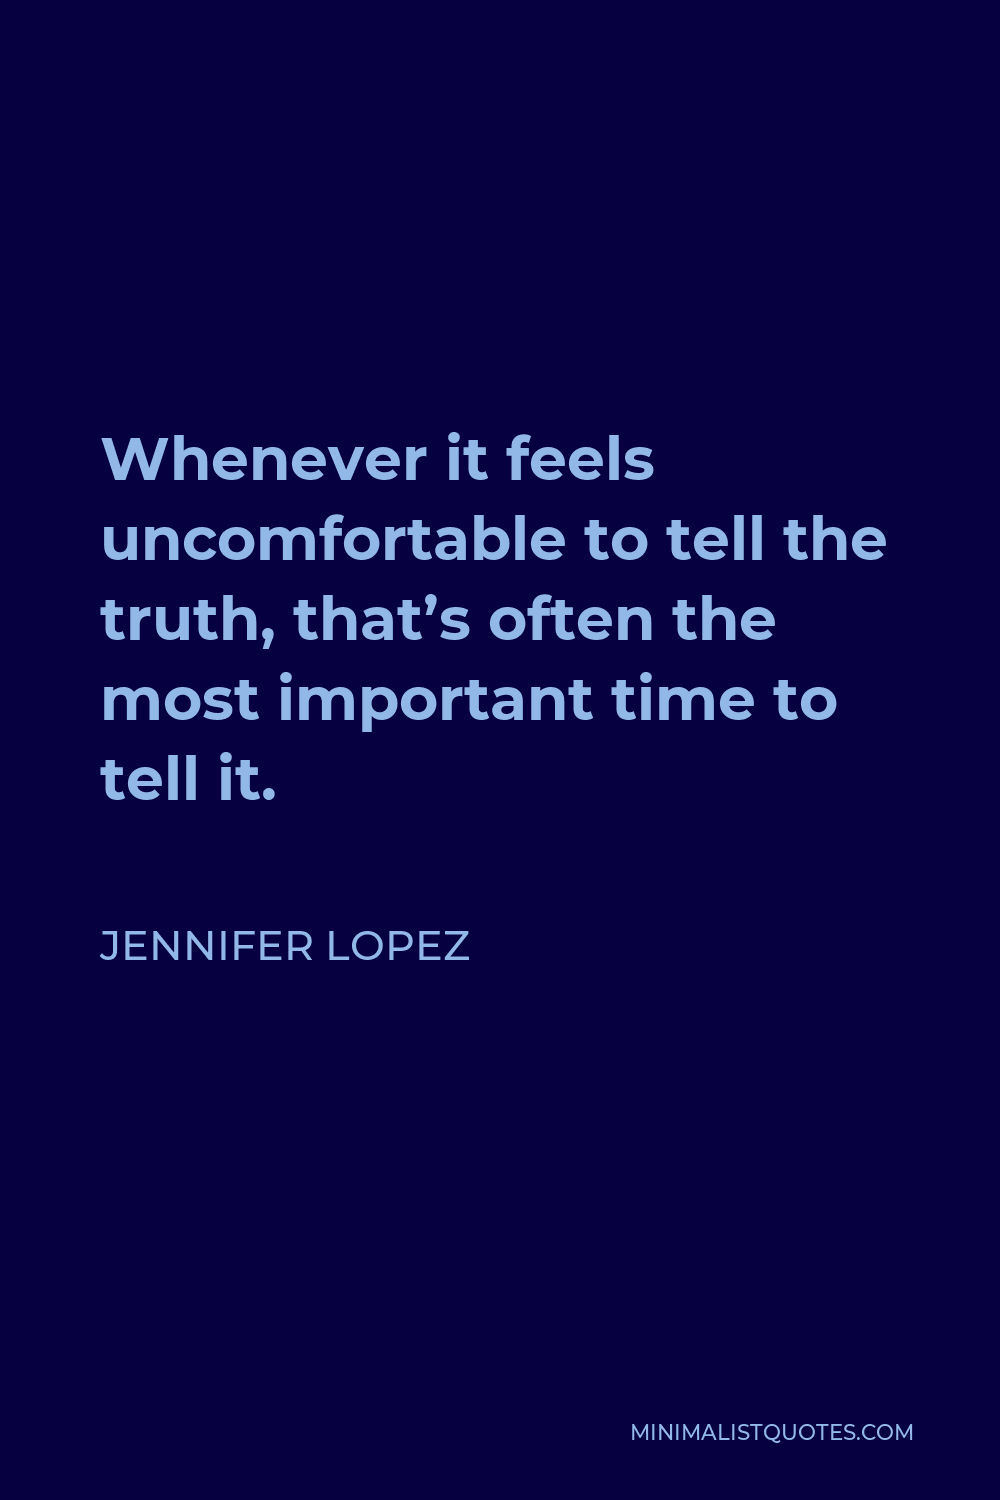 Jennifer Lopez Quote - Whenever it feels uncomfortable to tell the truth, that’s often the most important time to tell it.